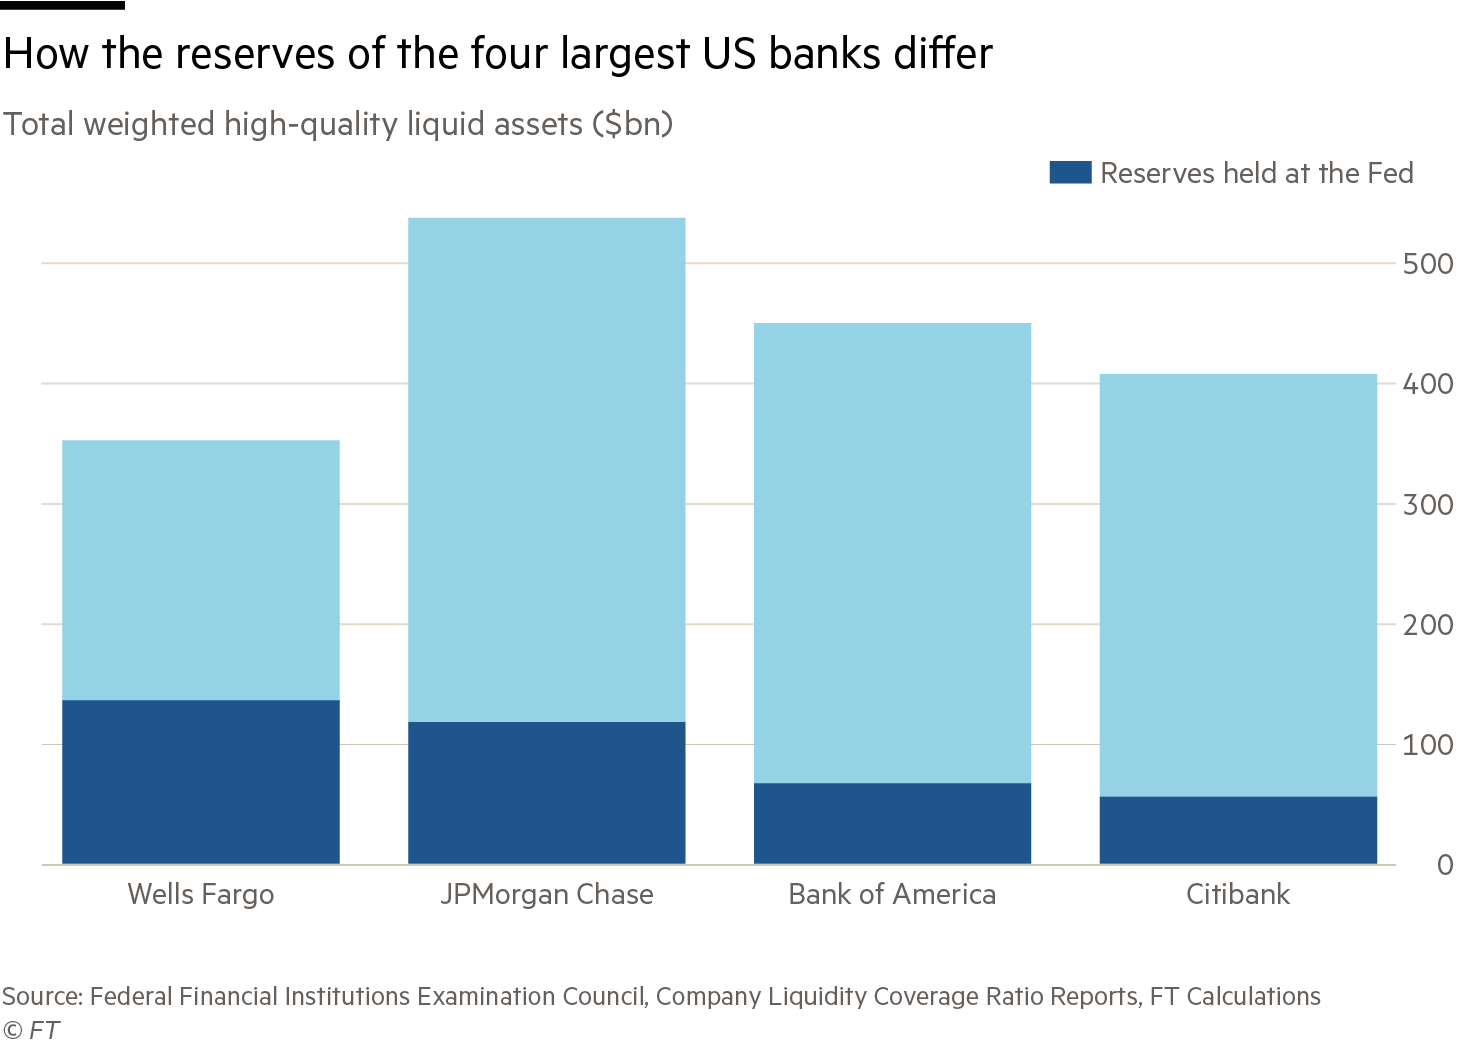 Column chart showing the reserves at the four largest US banks and the share of this which is held at the Fed